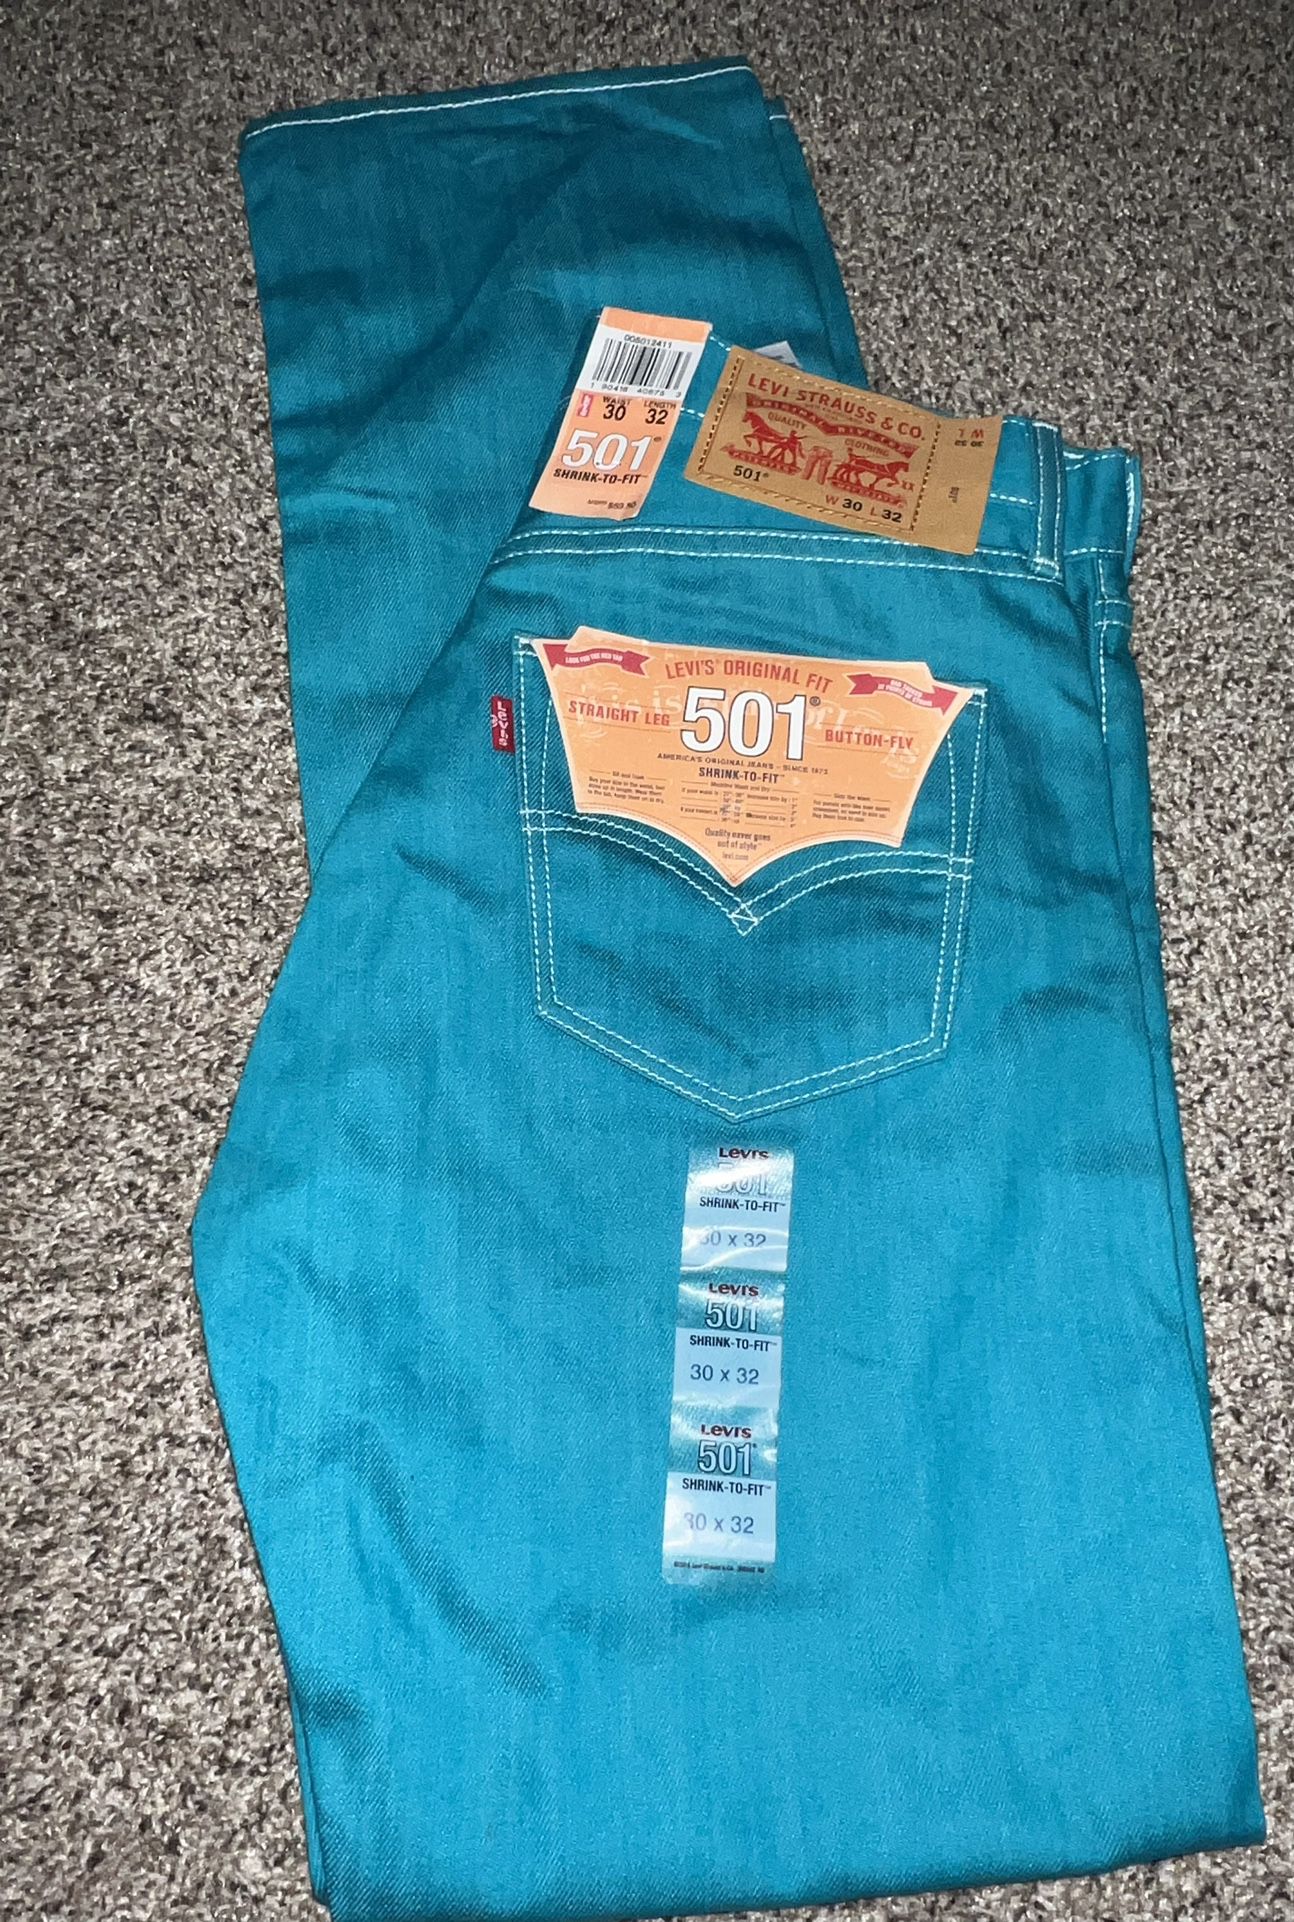 NWT Teal 501 LEVIS 30x32 